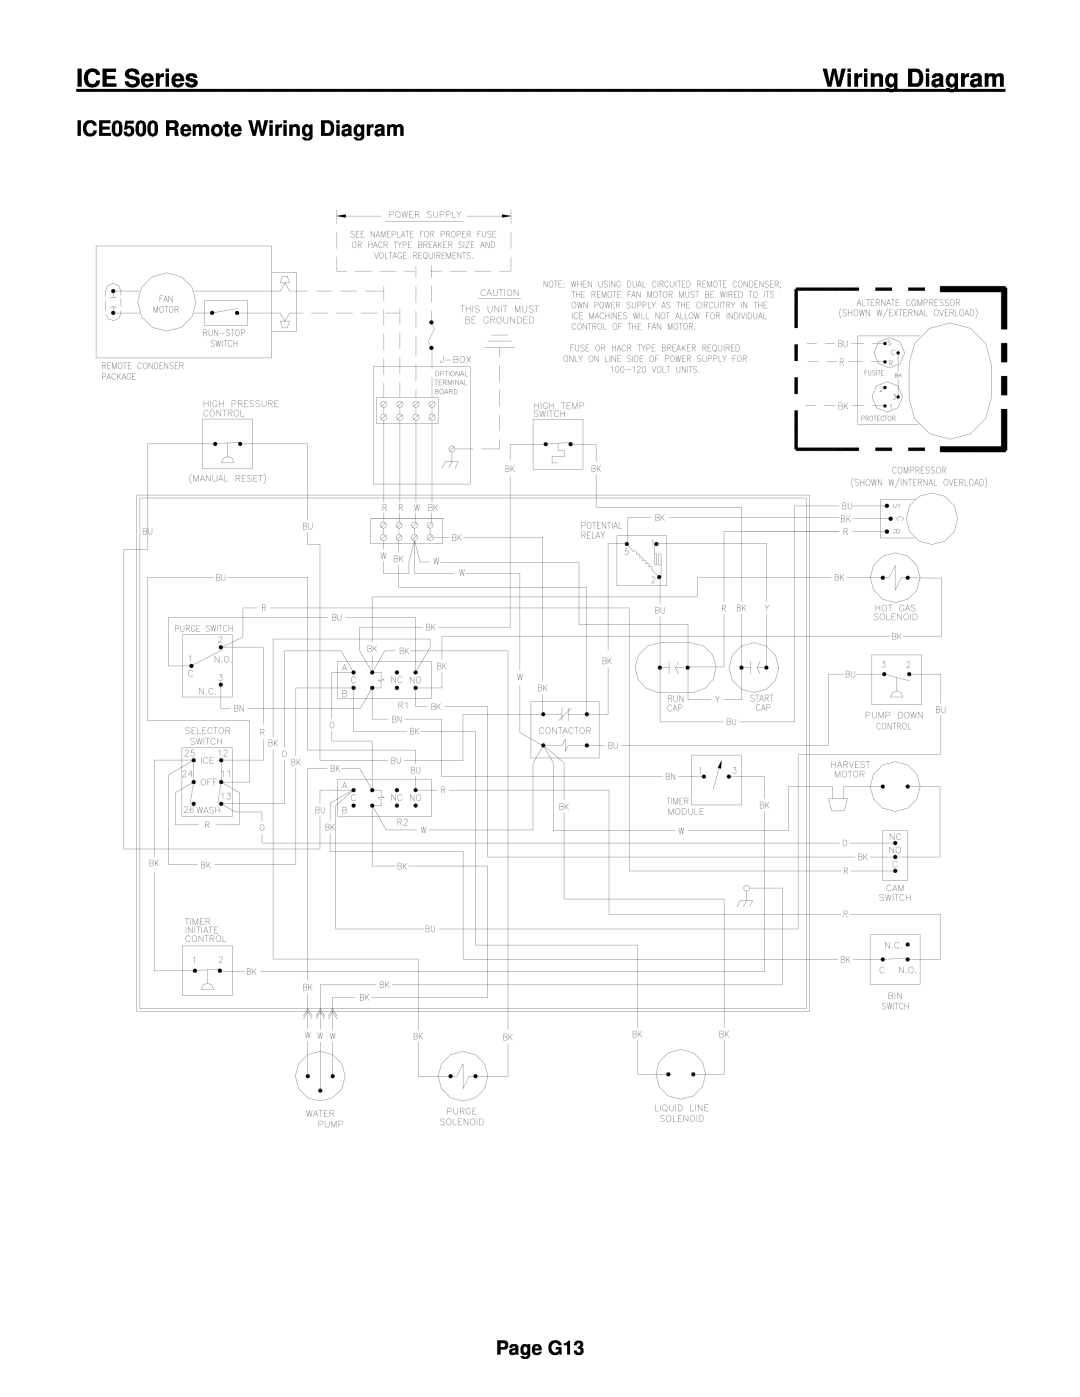 Ice-O-Matic ICE0250 Series installation manual ICE0500 Remote Wiring Diagram, ICE Series, Page G13 